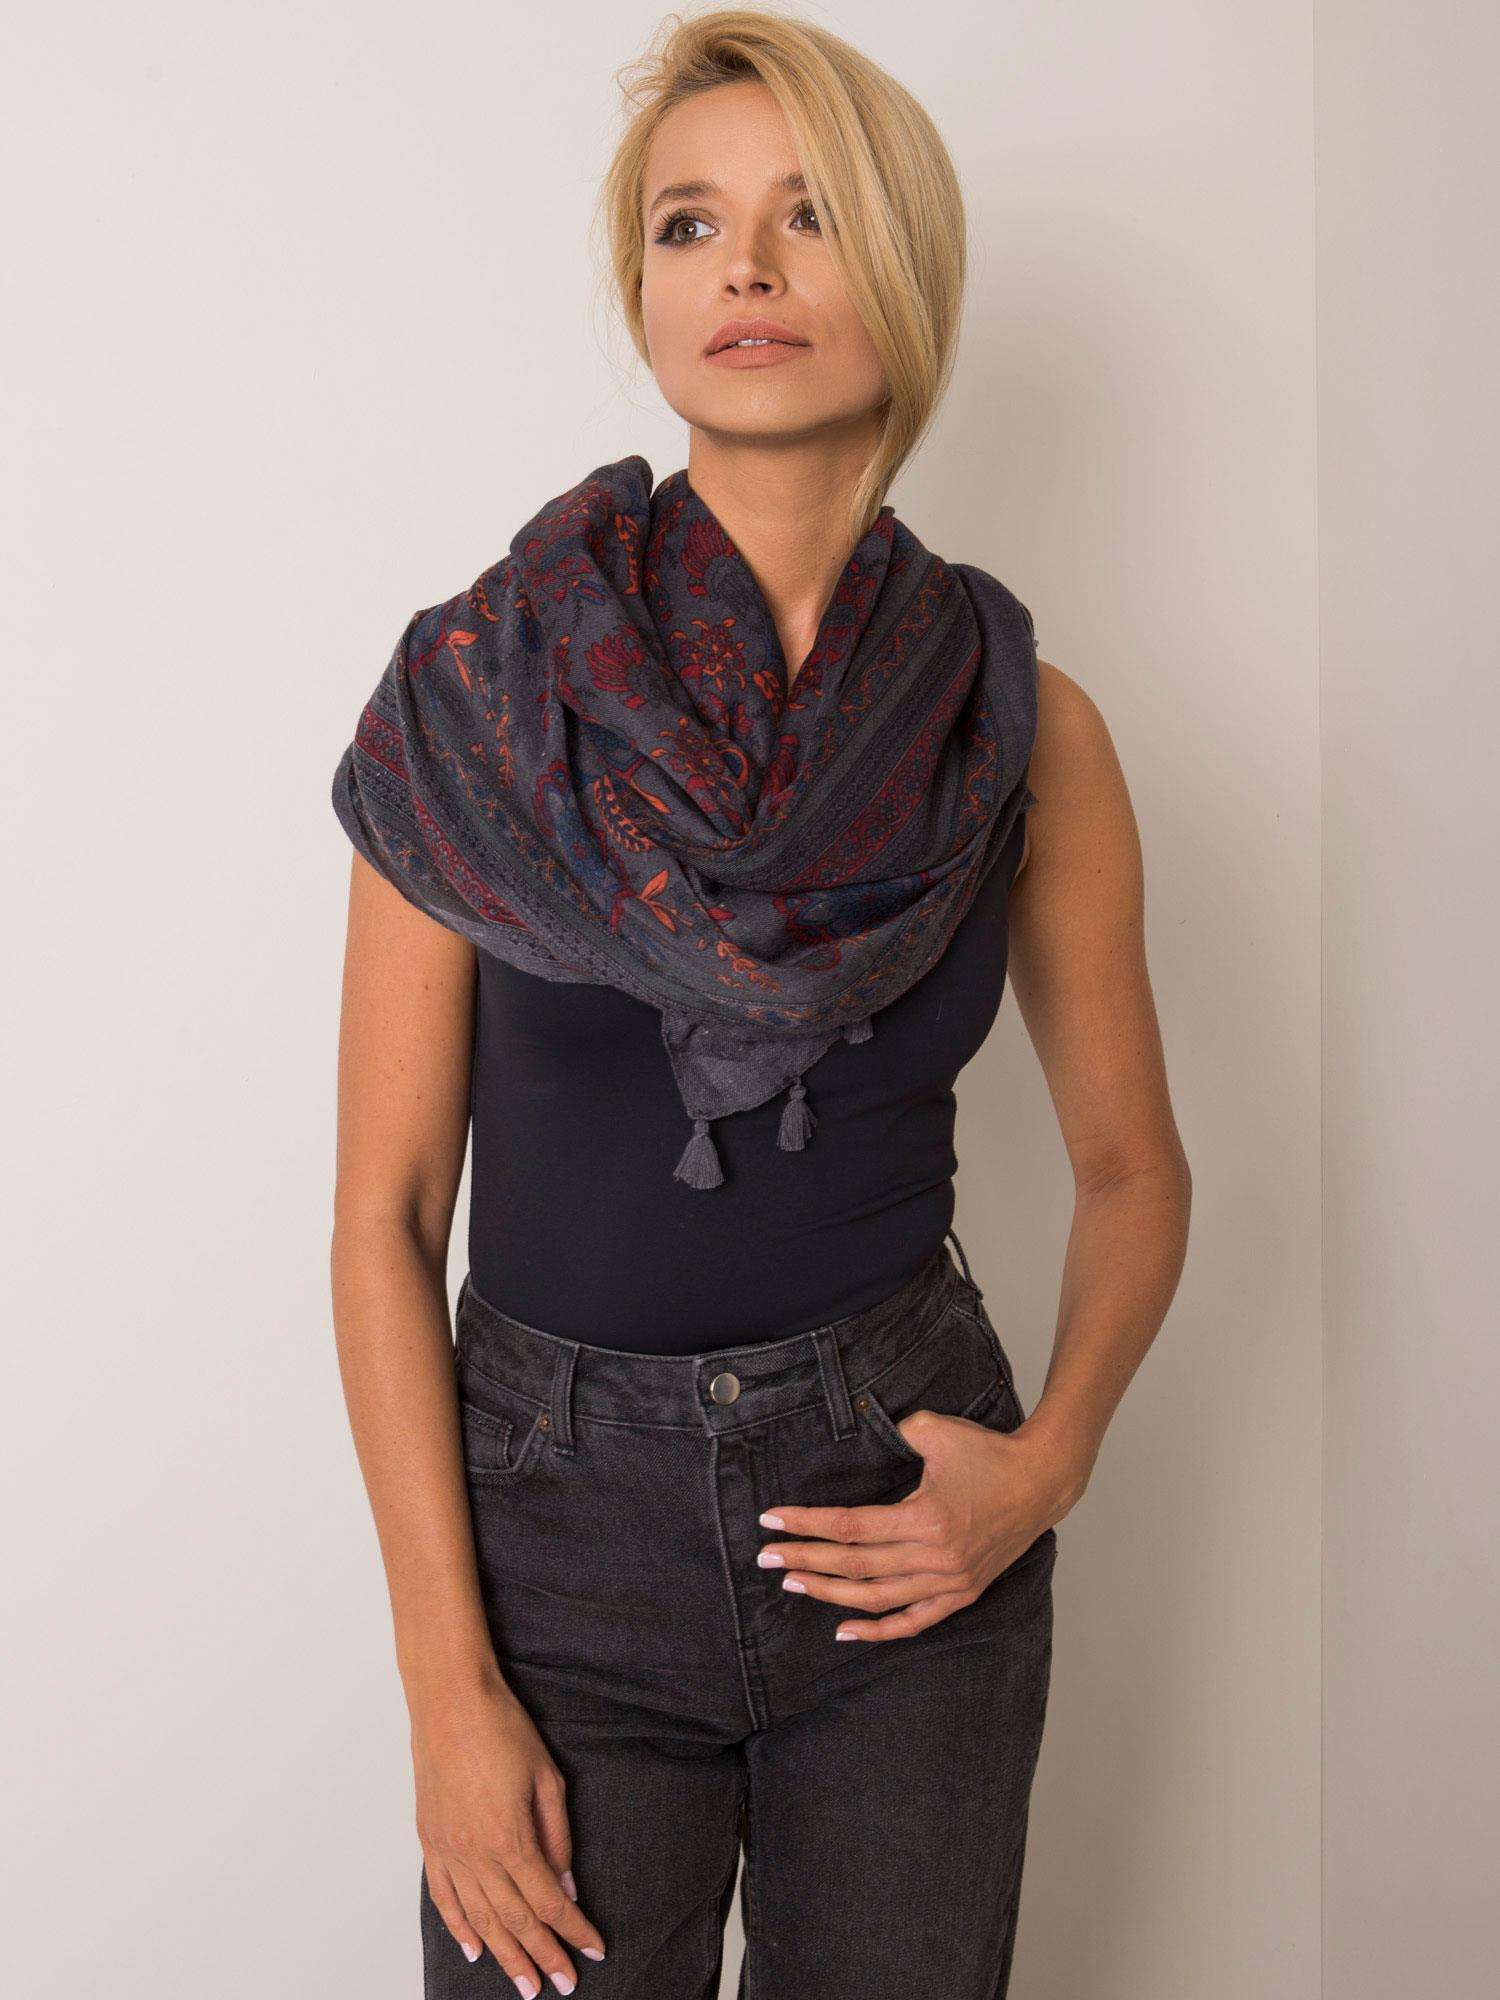 Gray scarf with floral patterns